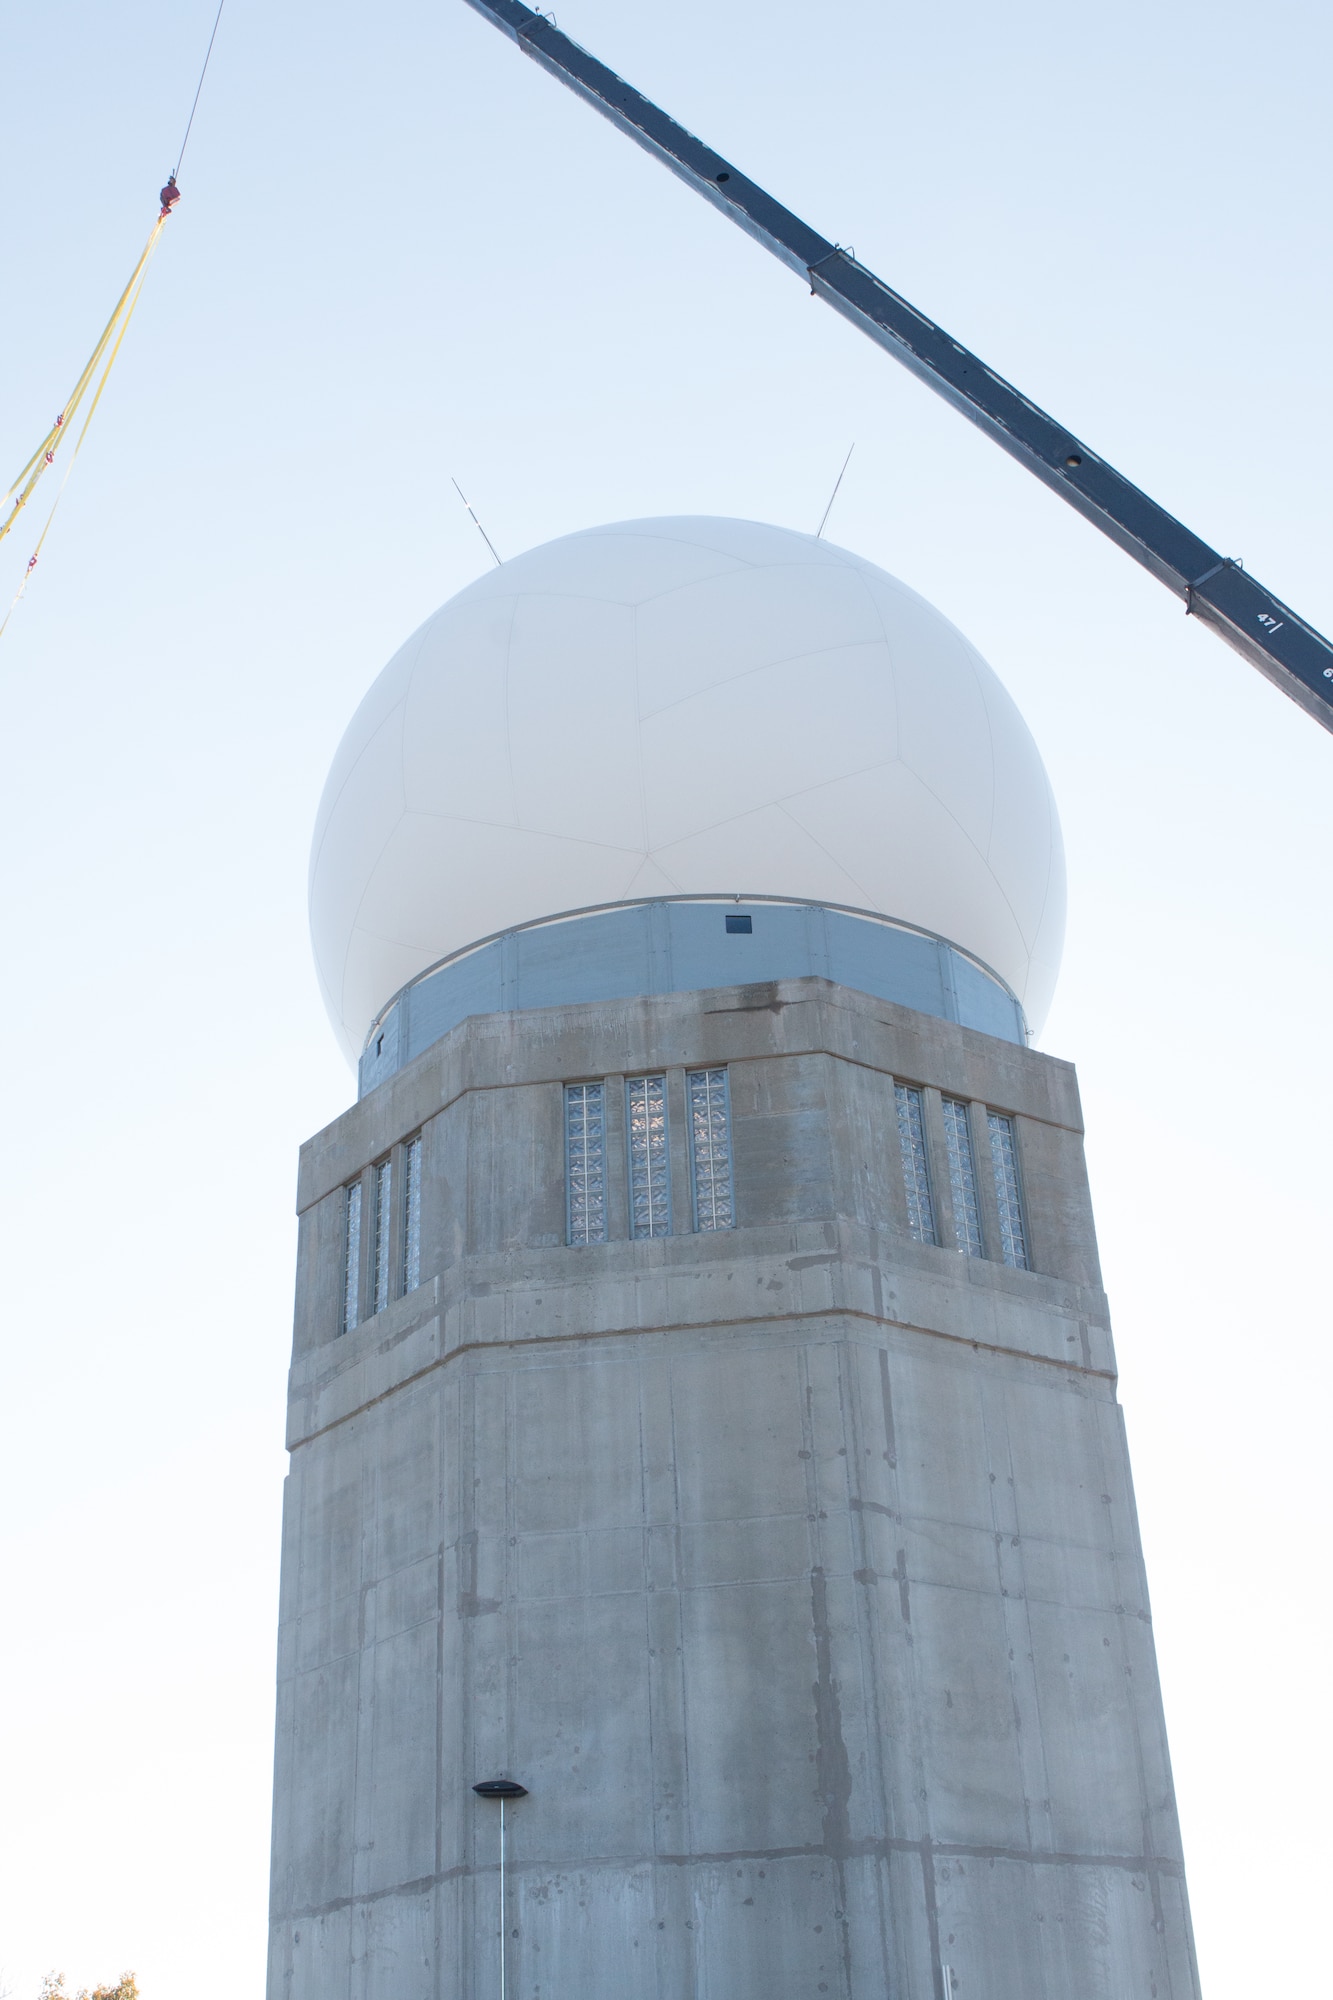 A newly installed fiber composite radome shields a tactical radar antenna at the top of the radar tower at the Orange Air National Guard Station, Orange, Conn., Oct. 25, 2014.  The maintenance-free radome is a protective shield that eliminates the need to fold and protect the $2 million antenna within from possible damage during severe weather, enabling the Airmen of the 103rd Air Control Squadron to focus on other mission priorities.  (Photo courtesy of Senior Master Sgt. Keith Haessly)